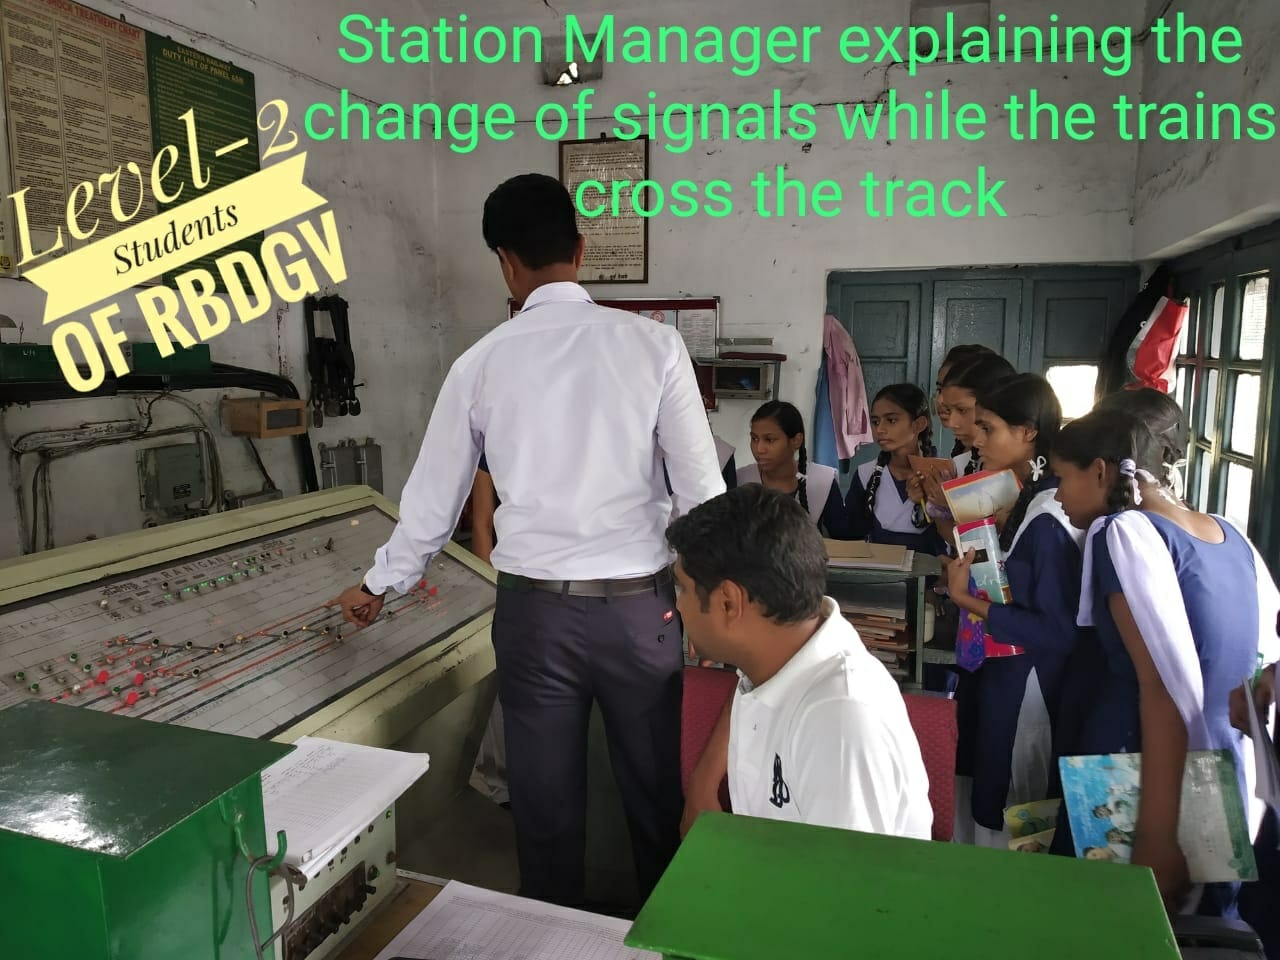 explanation and demonstrations were given by the Station Manager, Manoj Kumar Singh